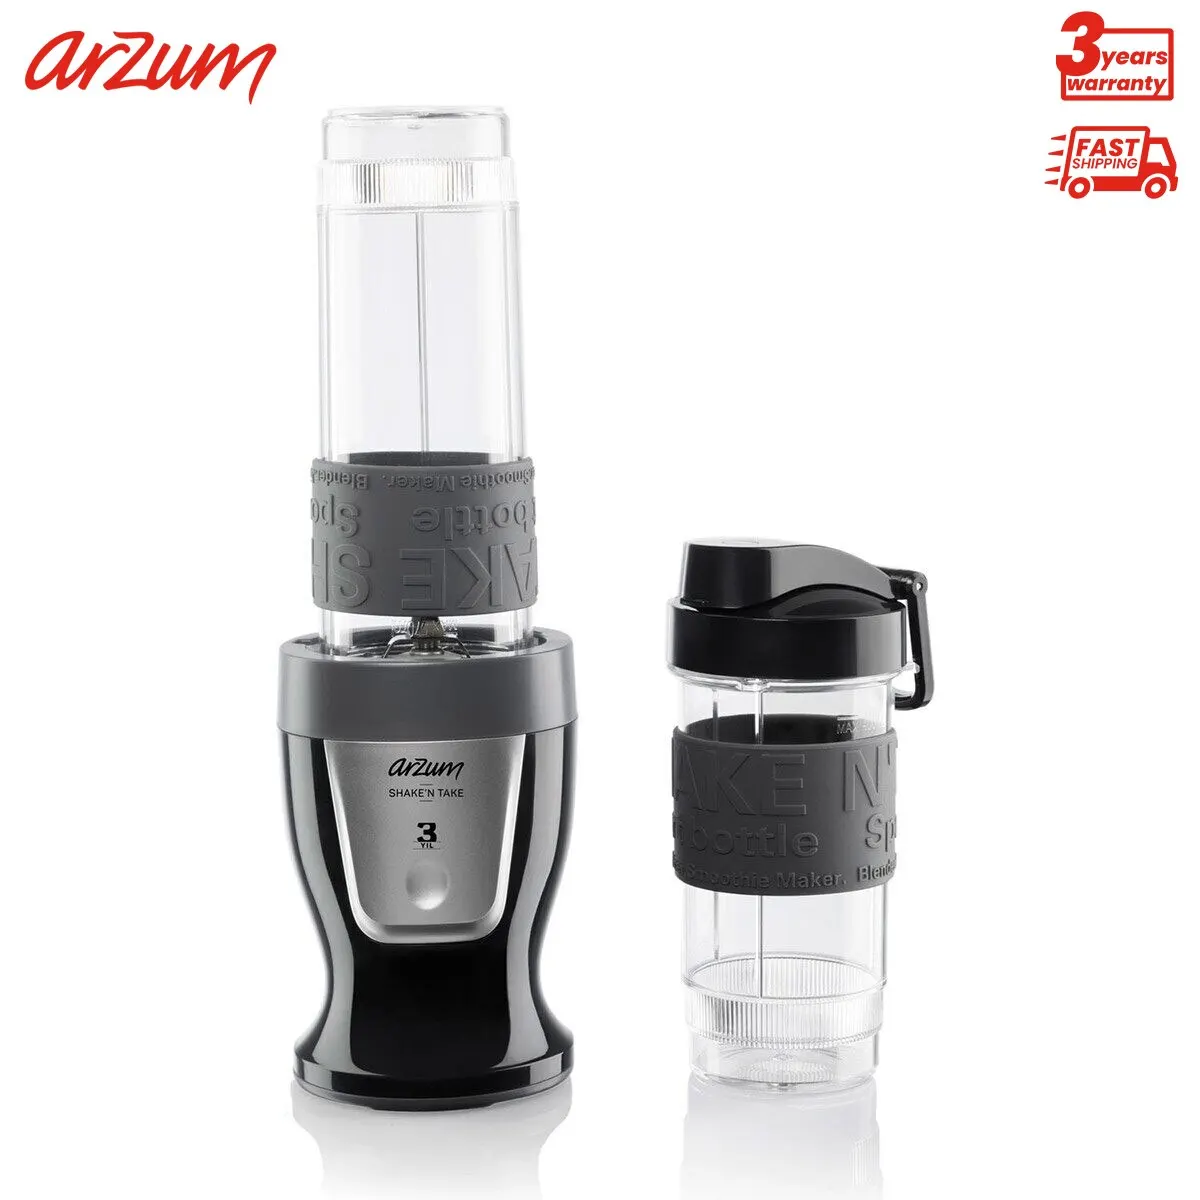 

MY DESIRE AR1032 Blender Take Personal Electric Blender Smoothie Maker Mixer Portable Cup Ergonomic Dripping Anti Cover